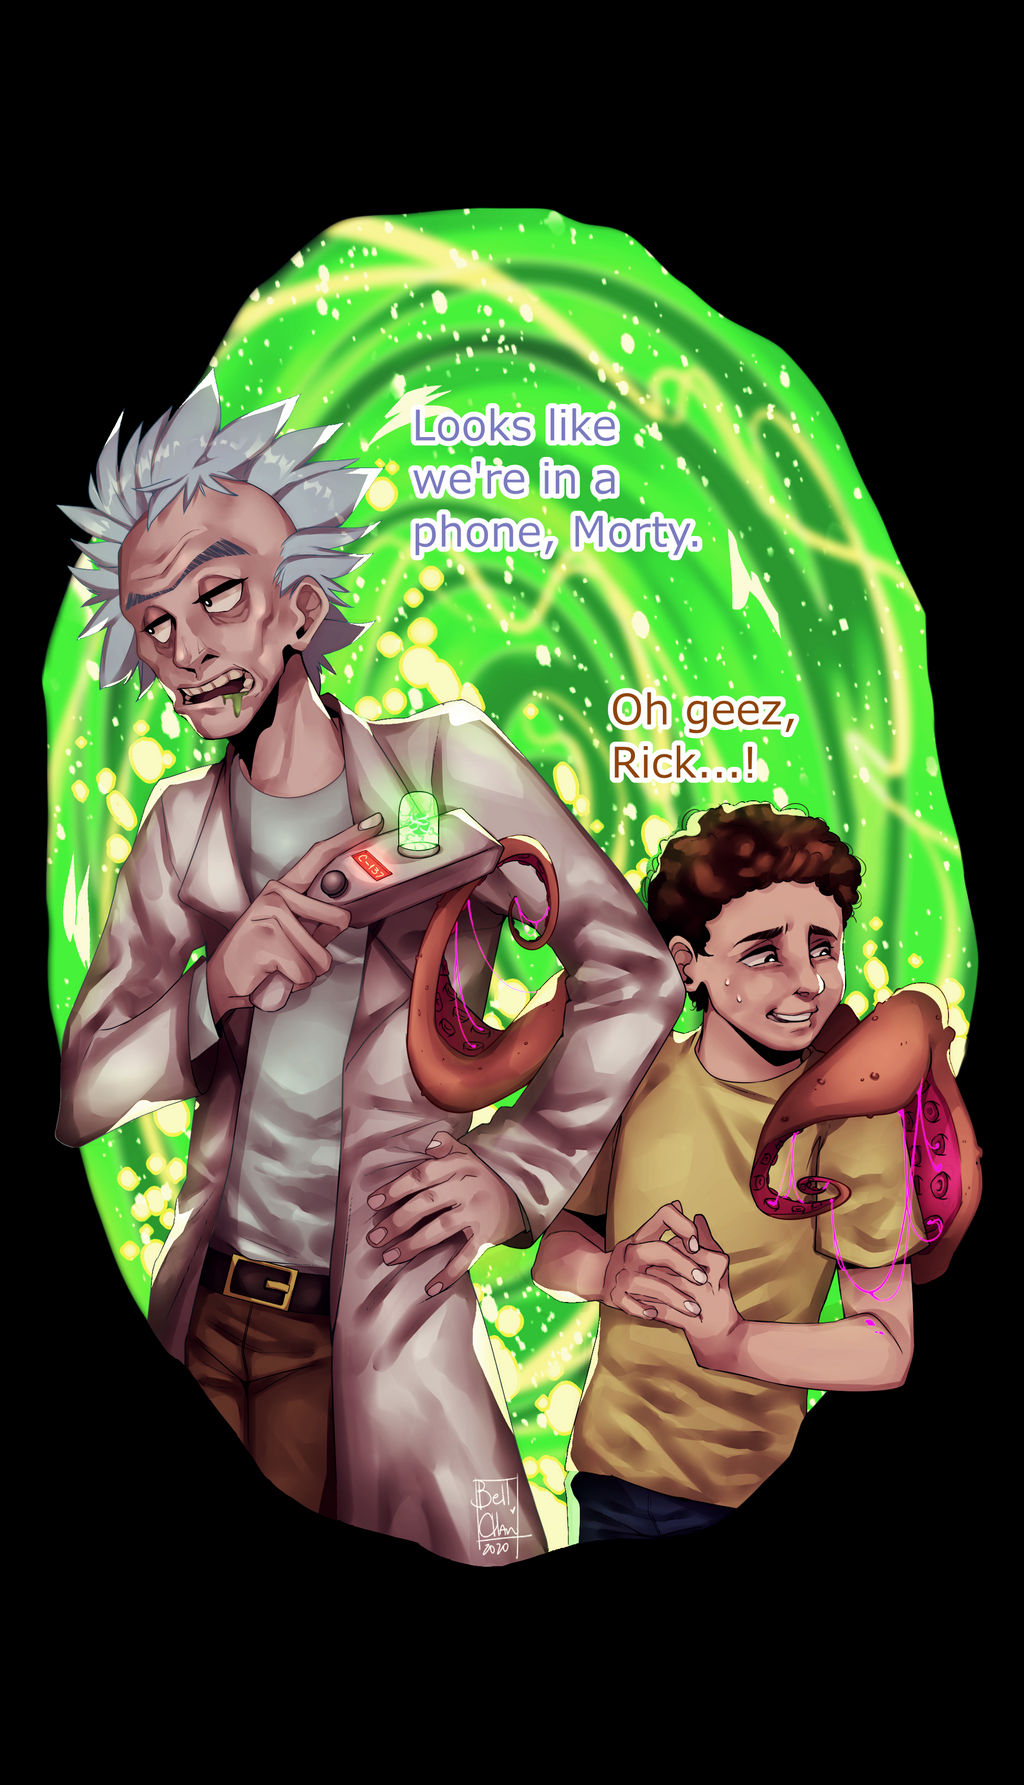 Rick and Morty wallpaper phone by Bellchaan on DeviantArt